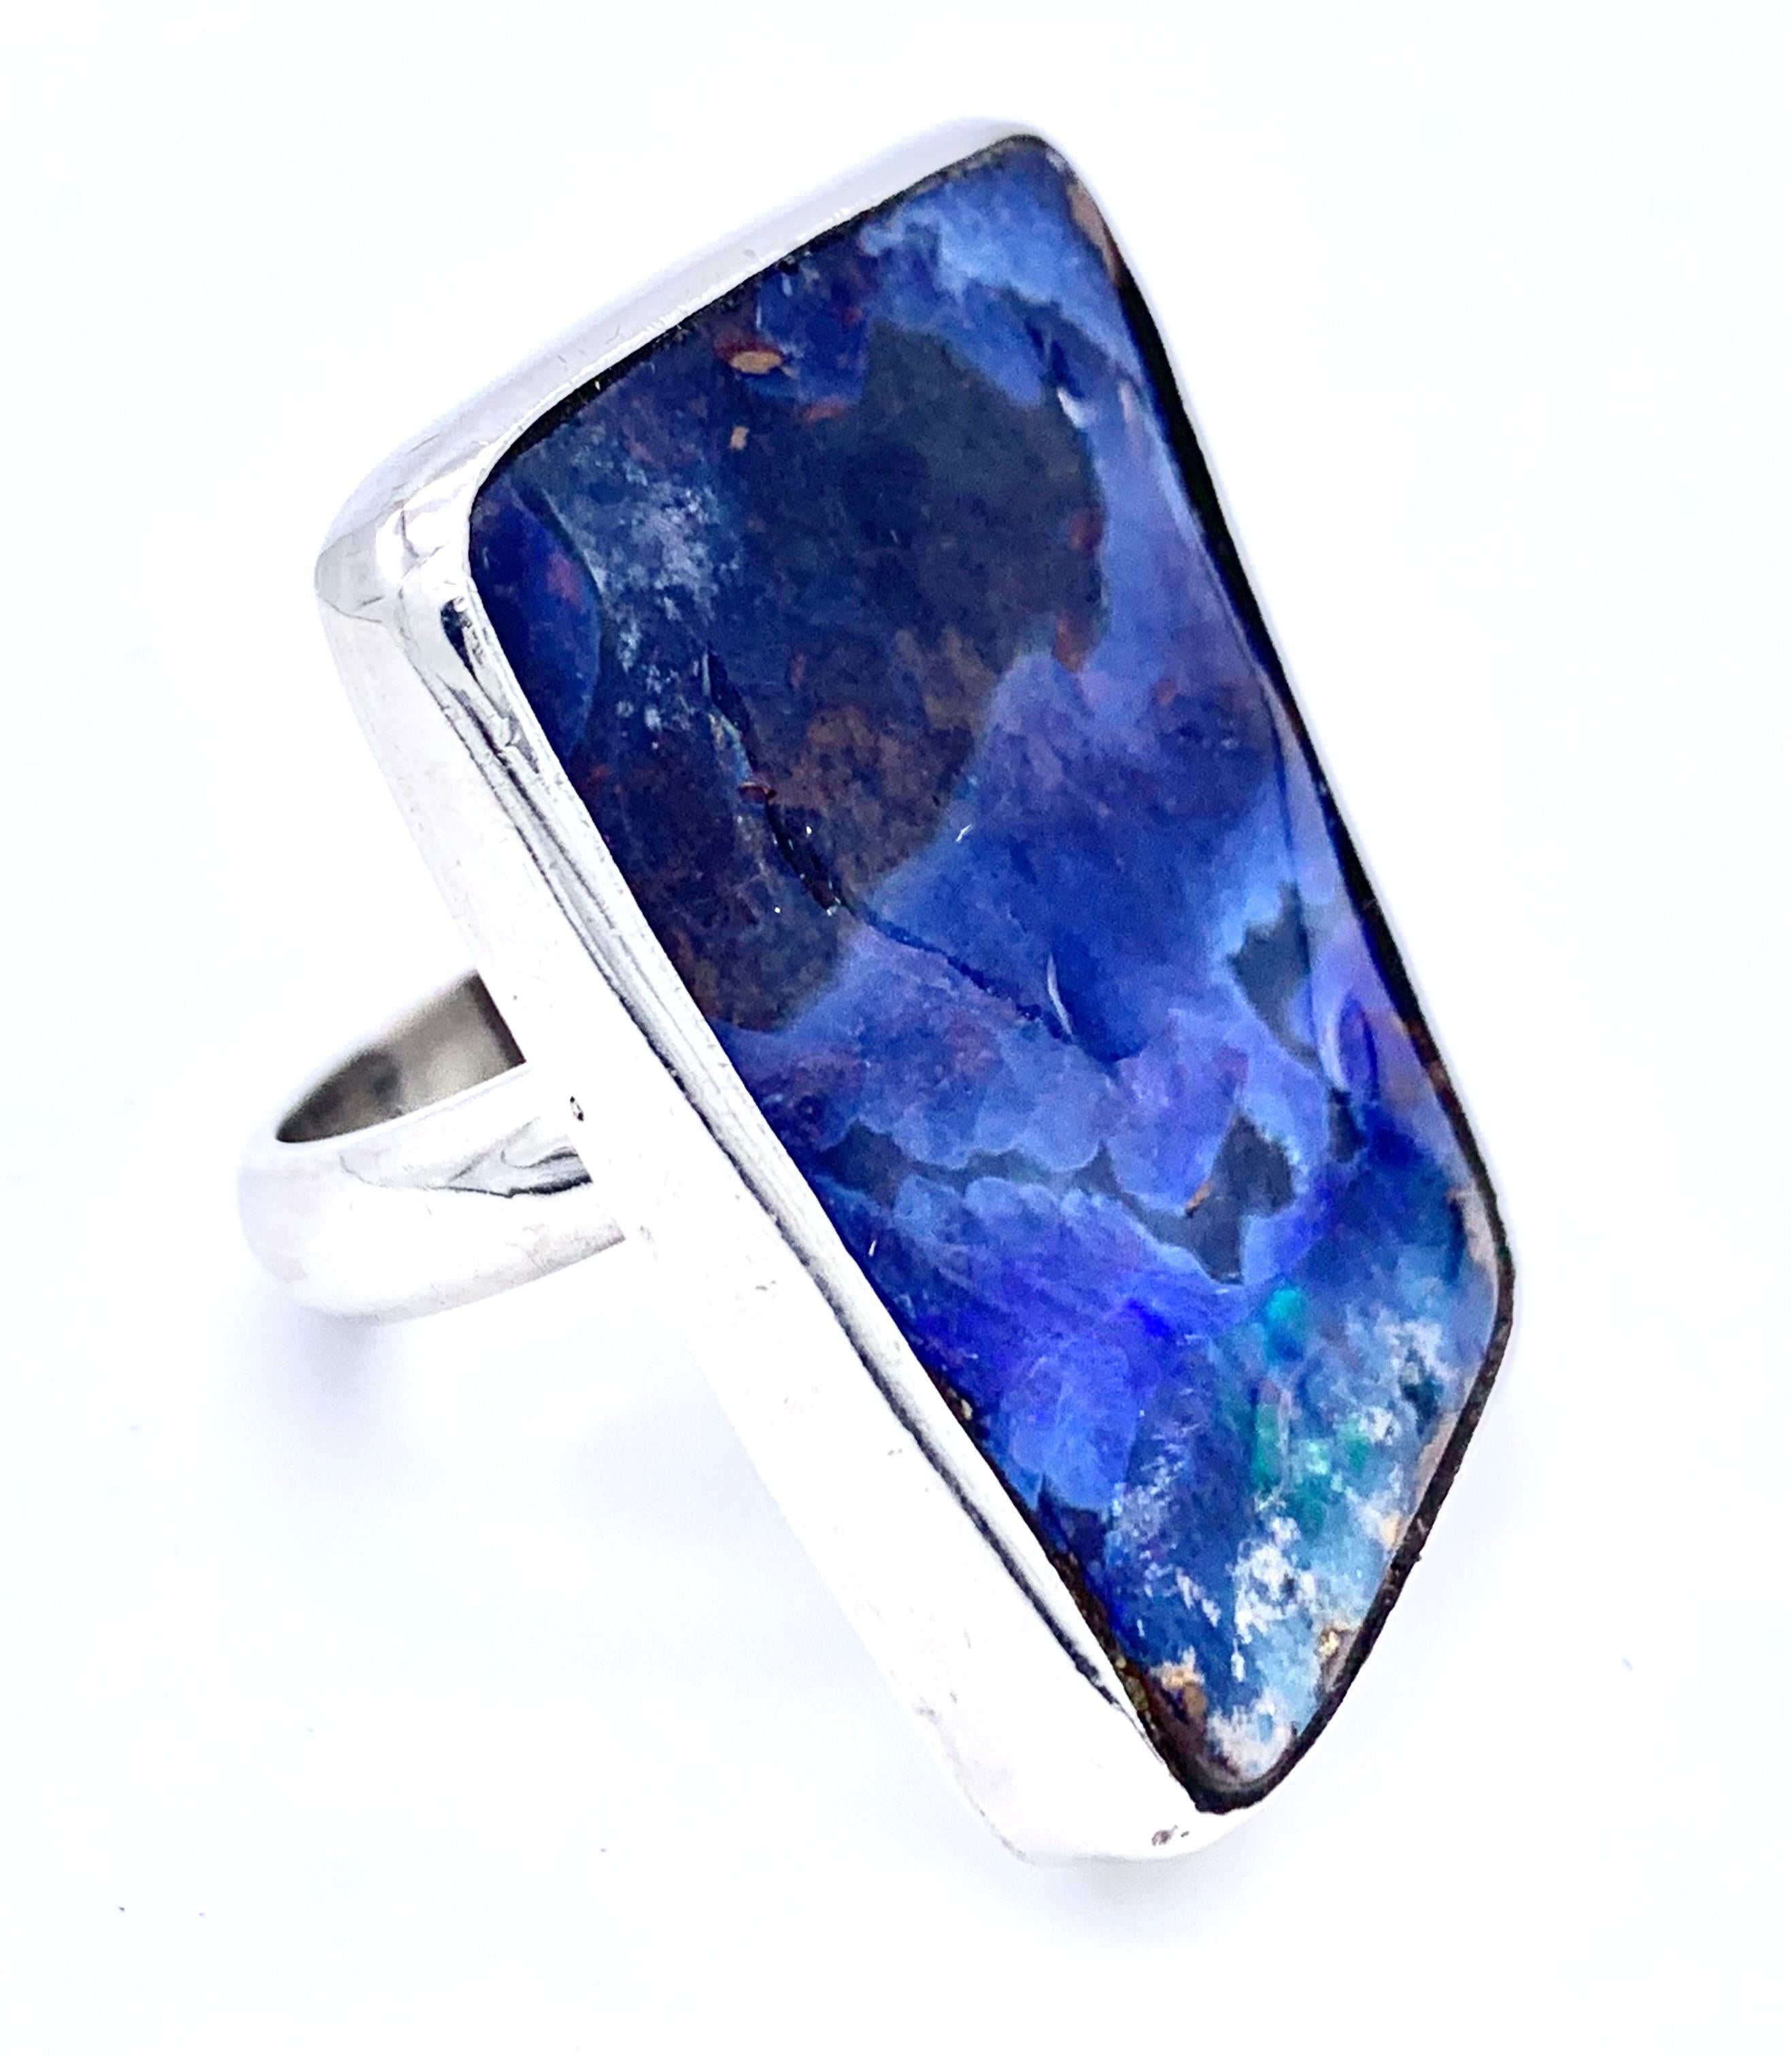 This large opal matrix ring is set in a sterling silver mount, The asymmetrical slice shows a wonderful array of blues and some fluorescent red specs. The stone has been polished to a flat, slightly concave surface which shows some natural